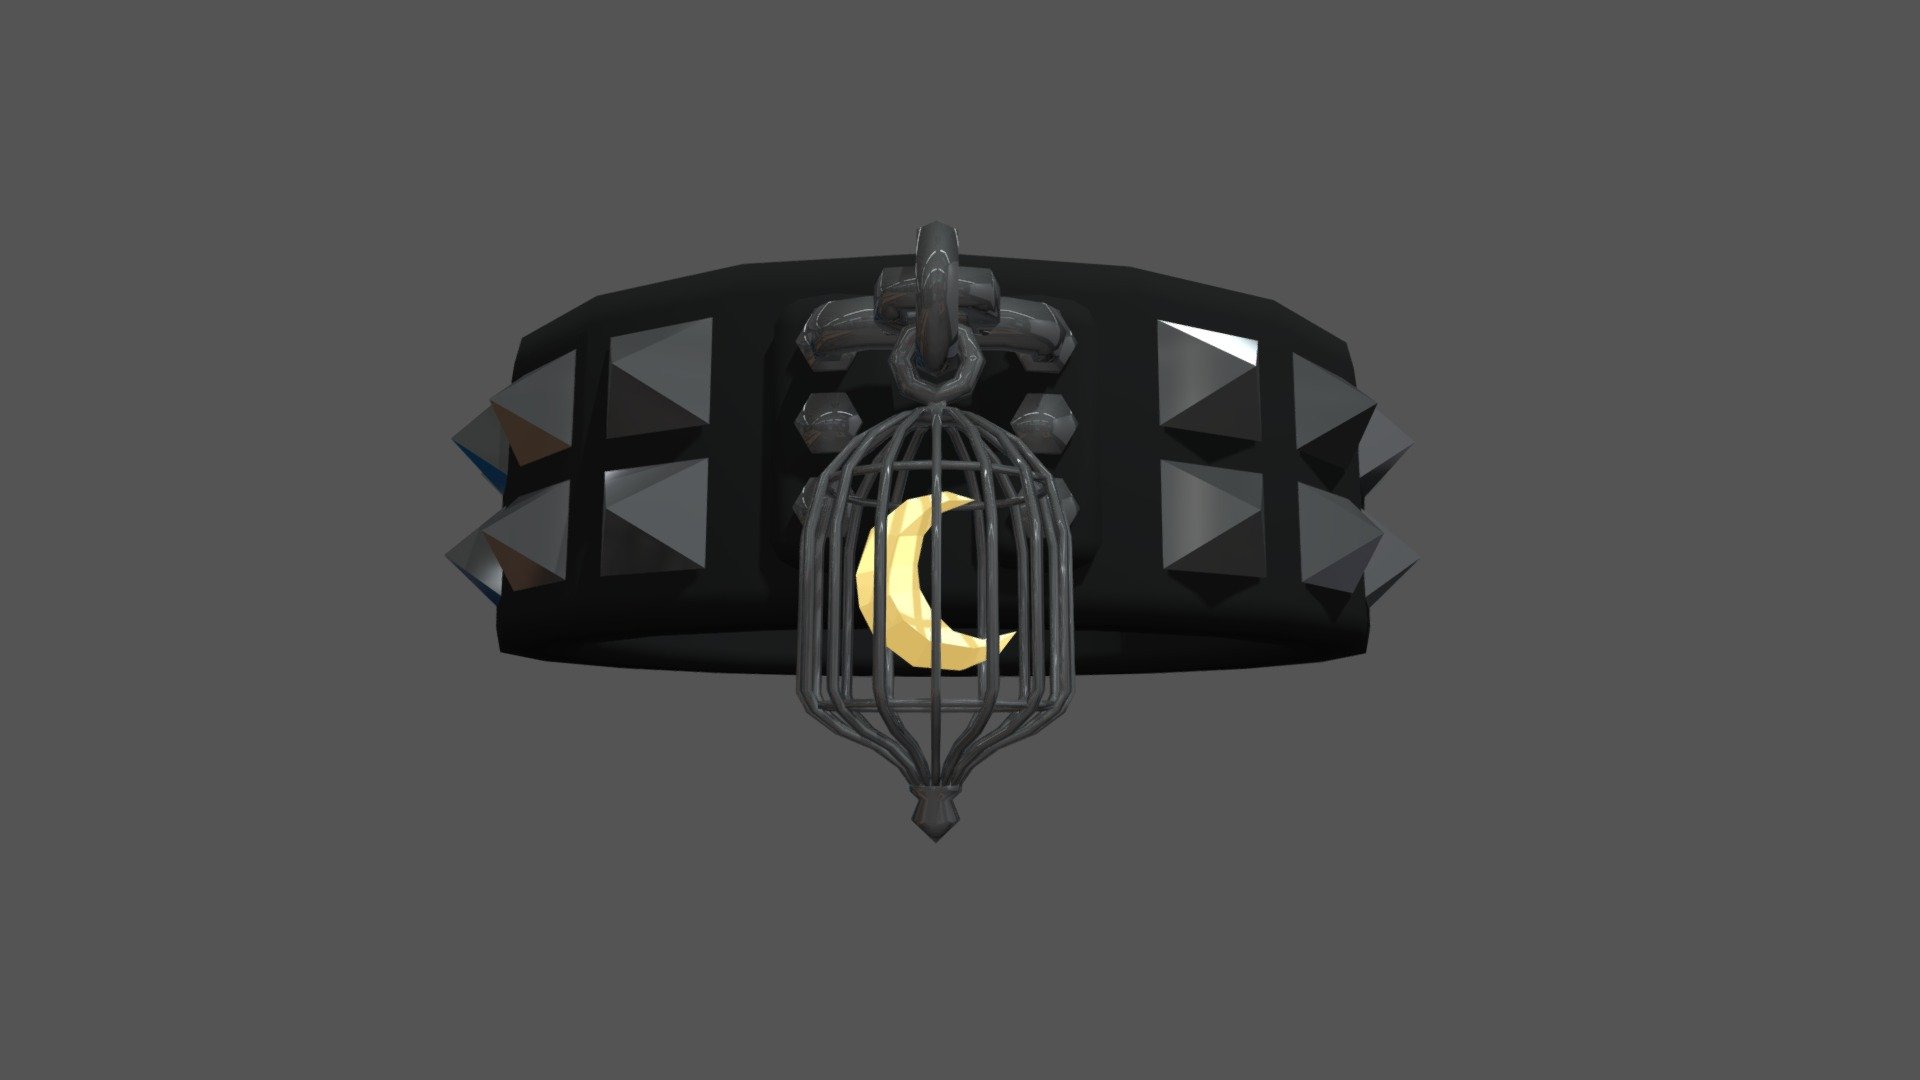 A free asset made for vrchat!
it's a choker with a bird cage dangling on the front, rigged for jiggle physics.
With blendshapes to change between either a moon or sun inside the cage 3d model